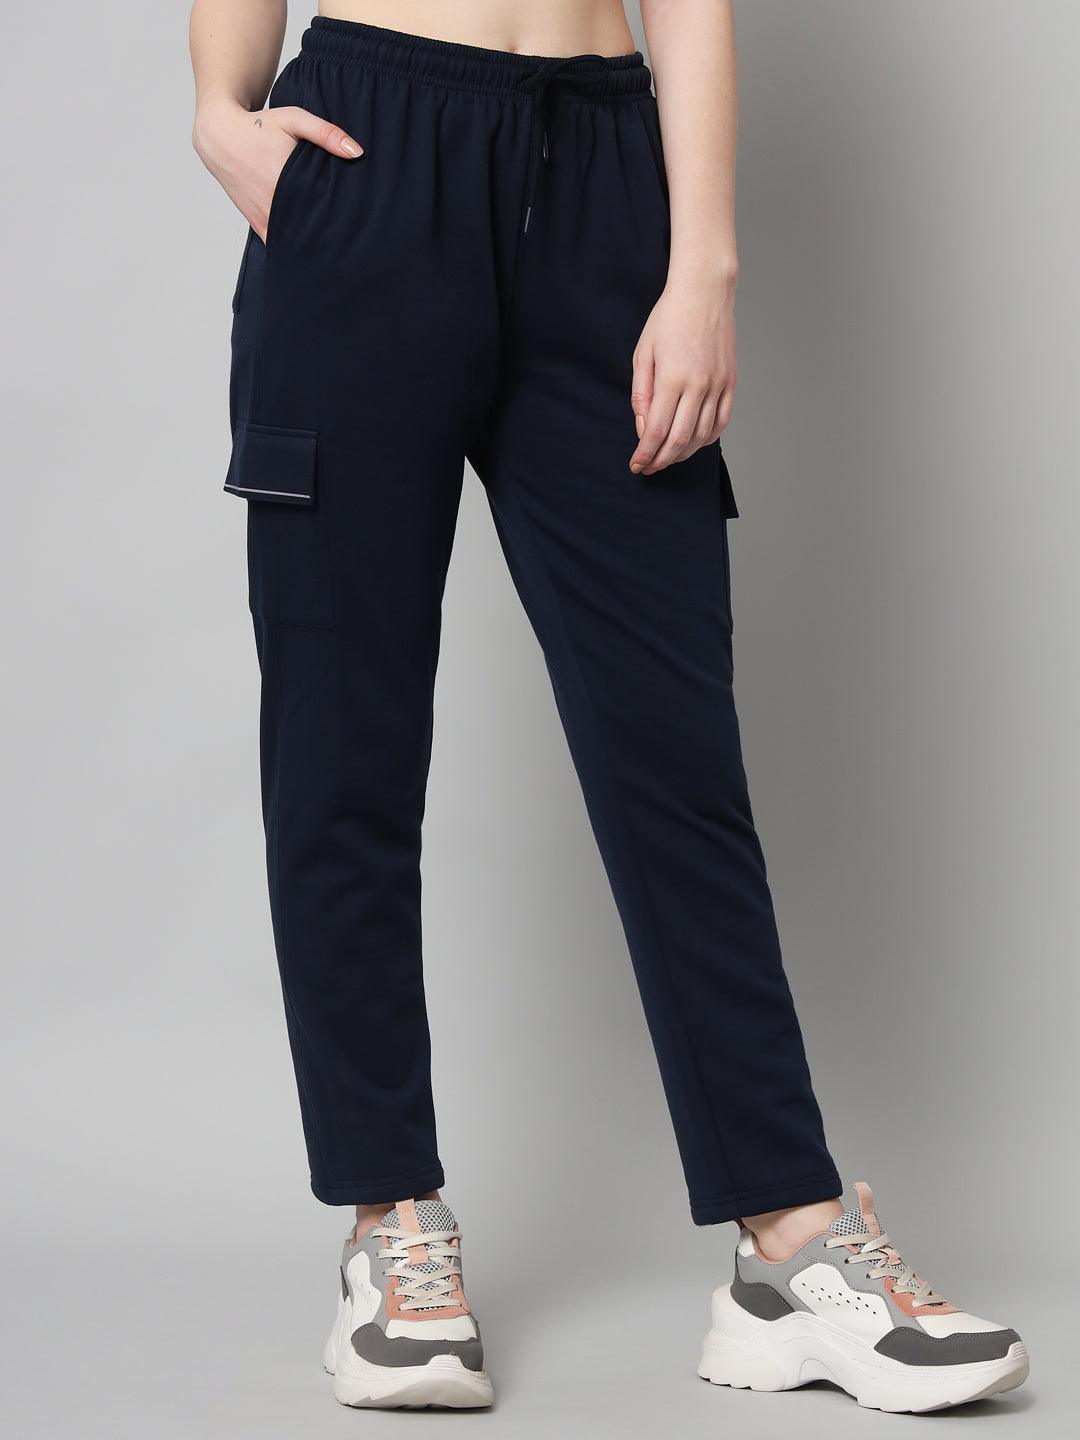 Griffel Women’s Front Logo 6 Pocket Grey Navy Trackpant - griffel